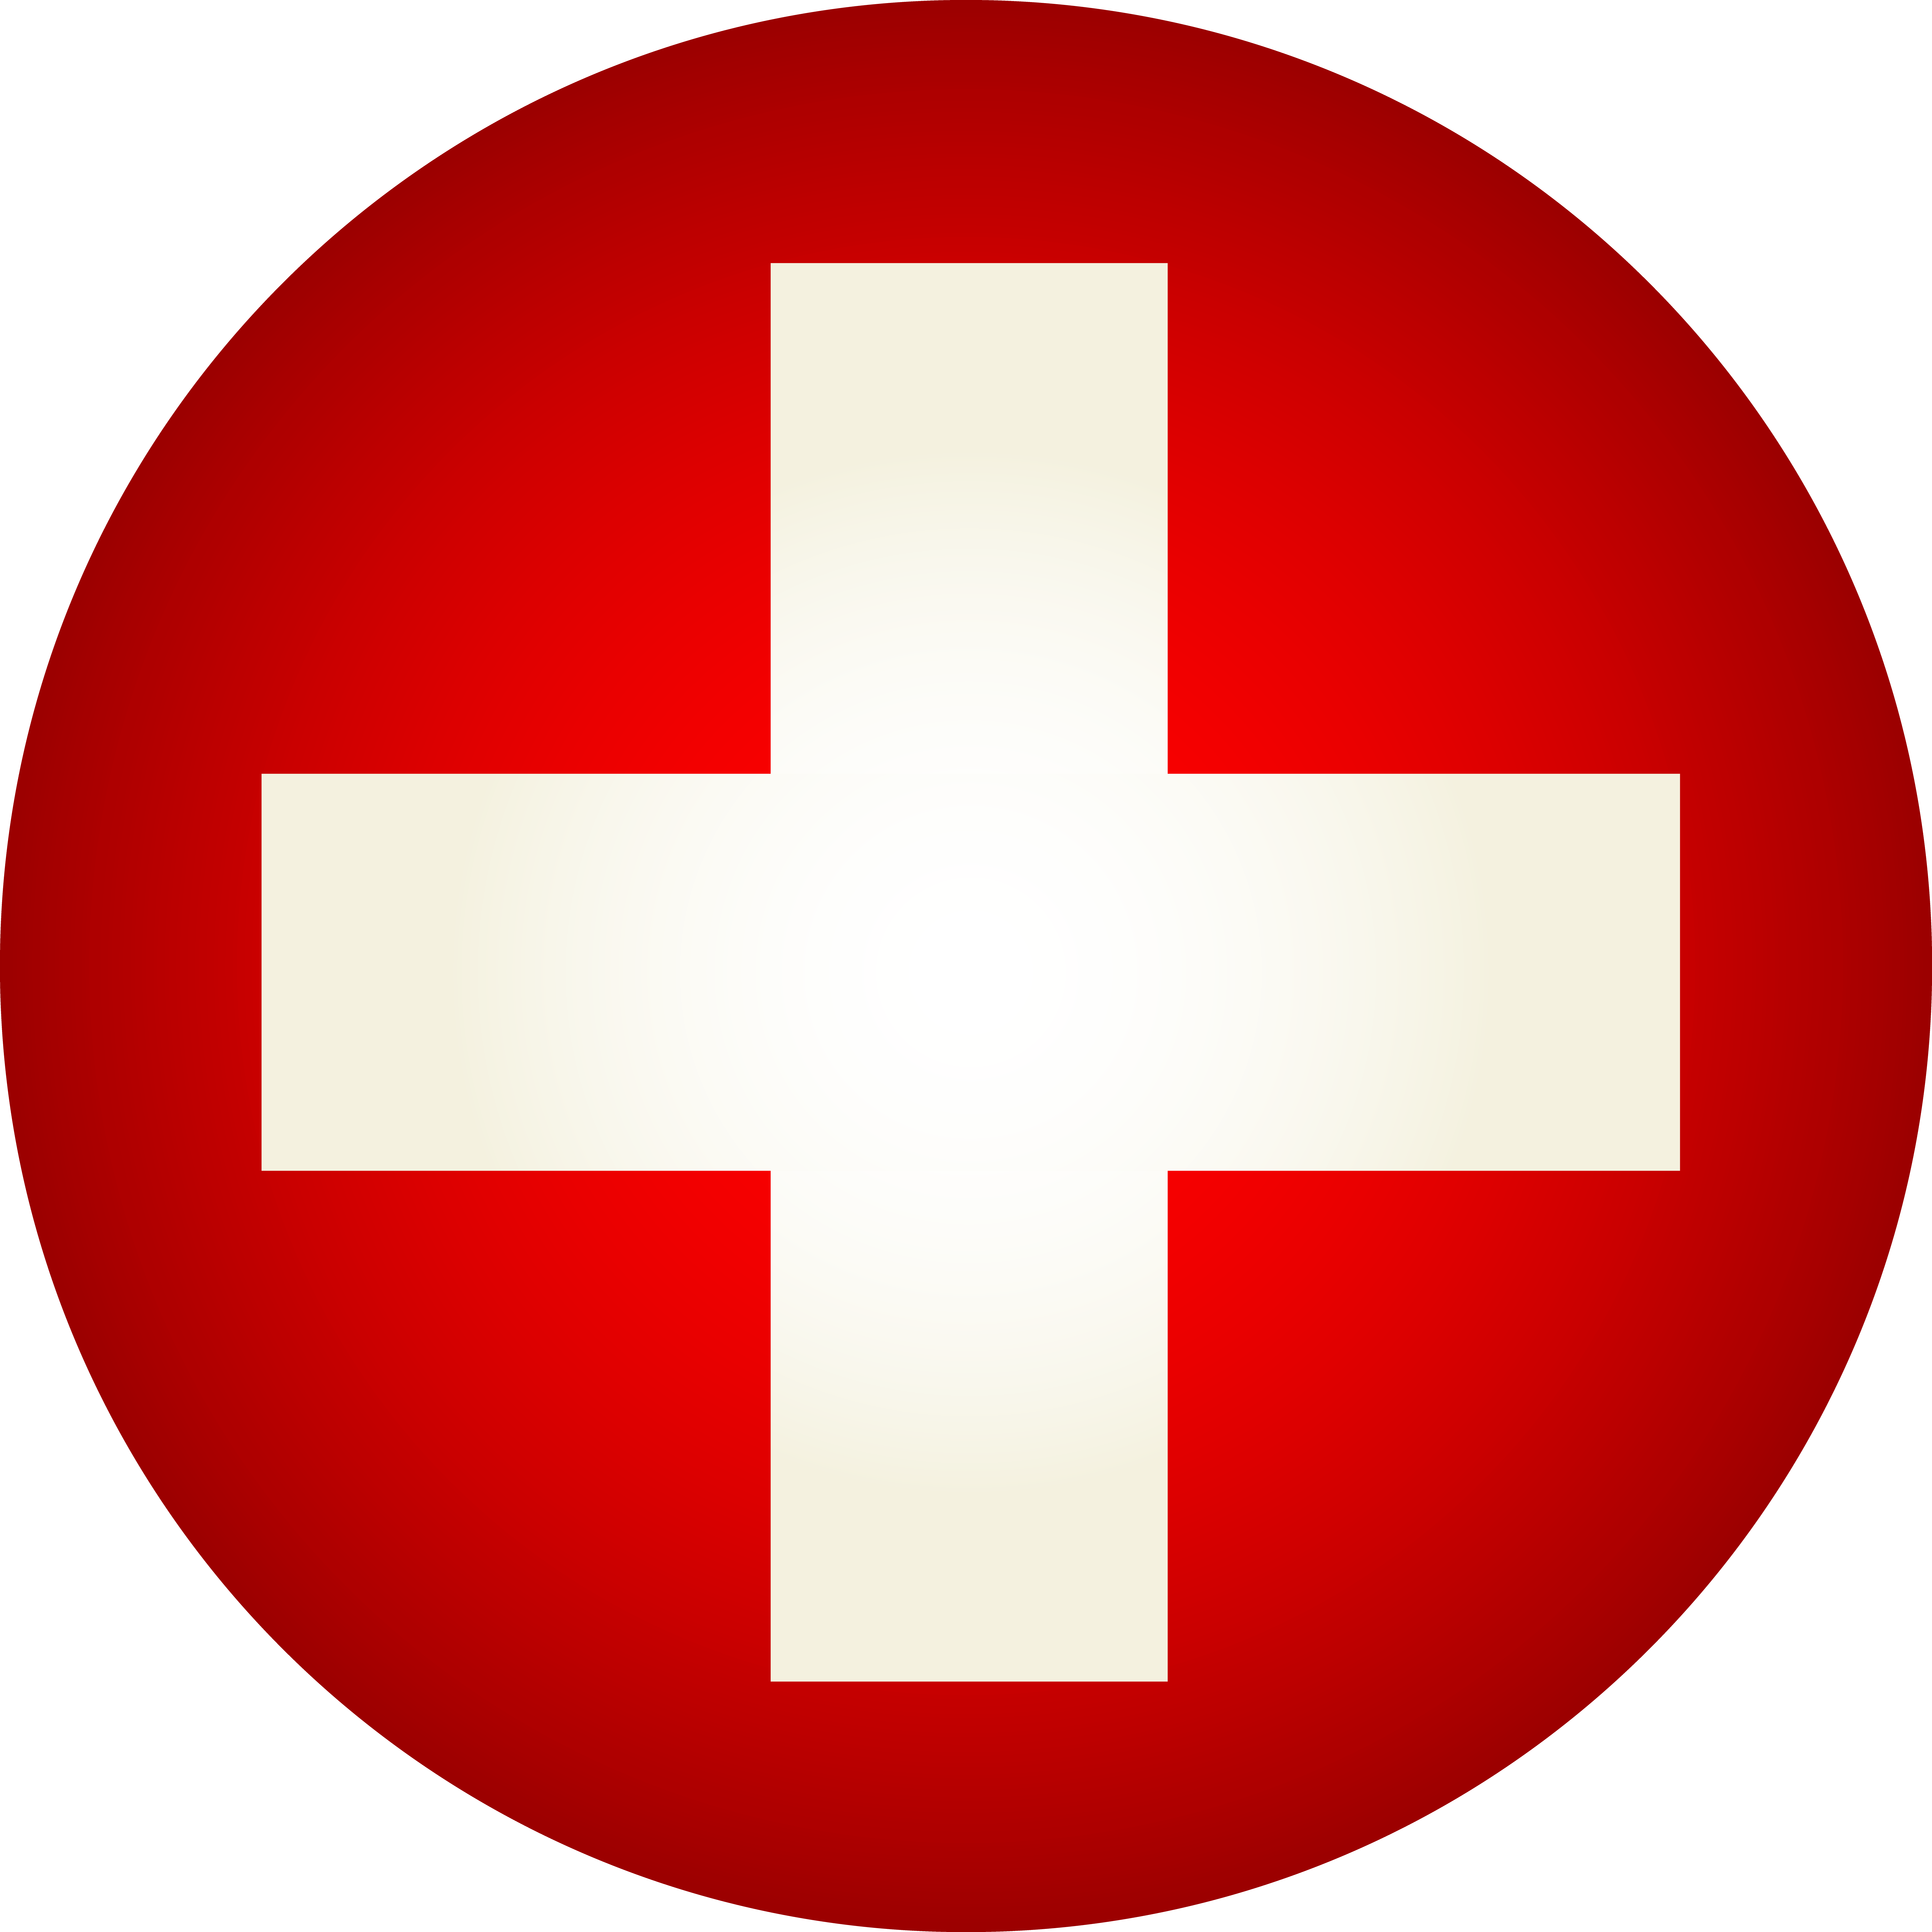 White with Red Cross Logistics Firm Logo - White Red Cross Logistics Firm Logos